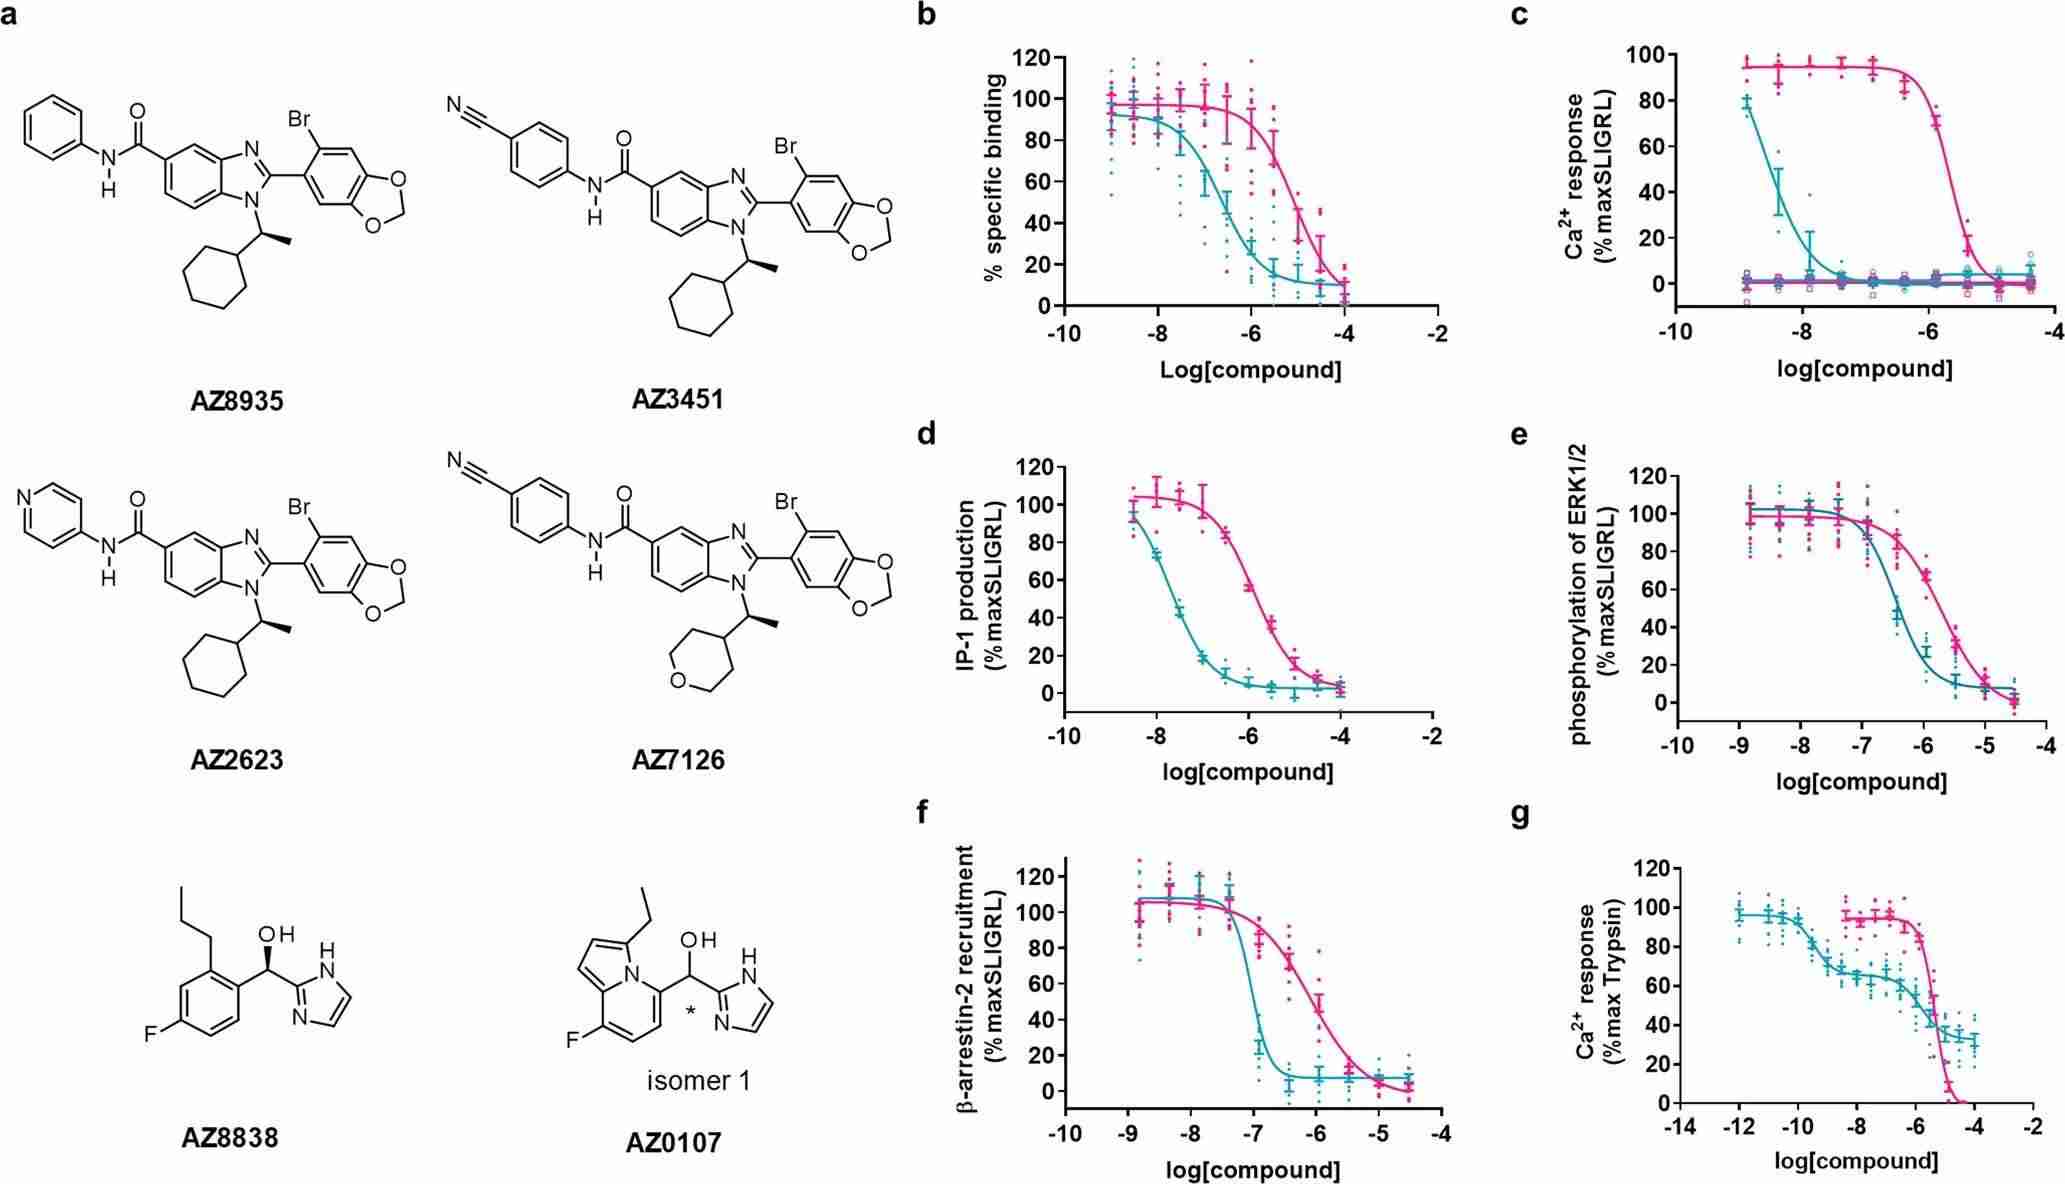 Analysis of PAR2 antagonists' pharmacological profiles